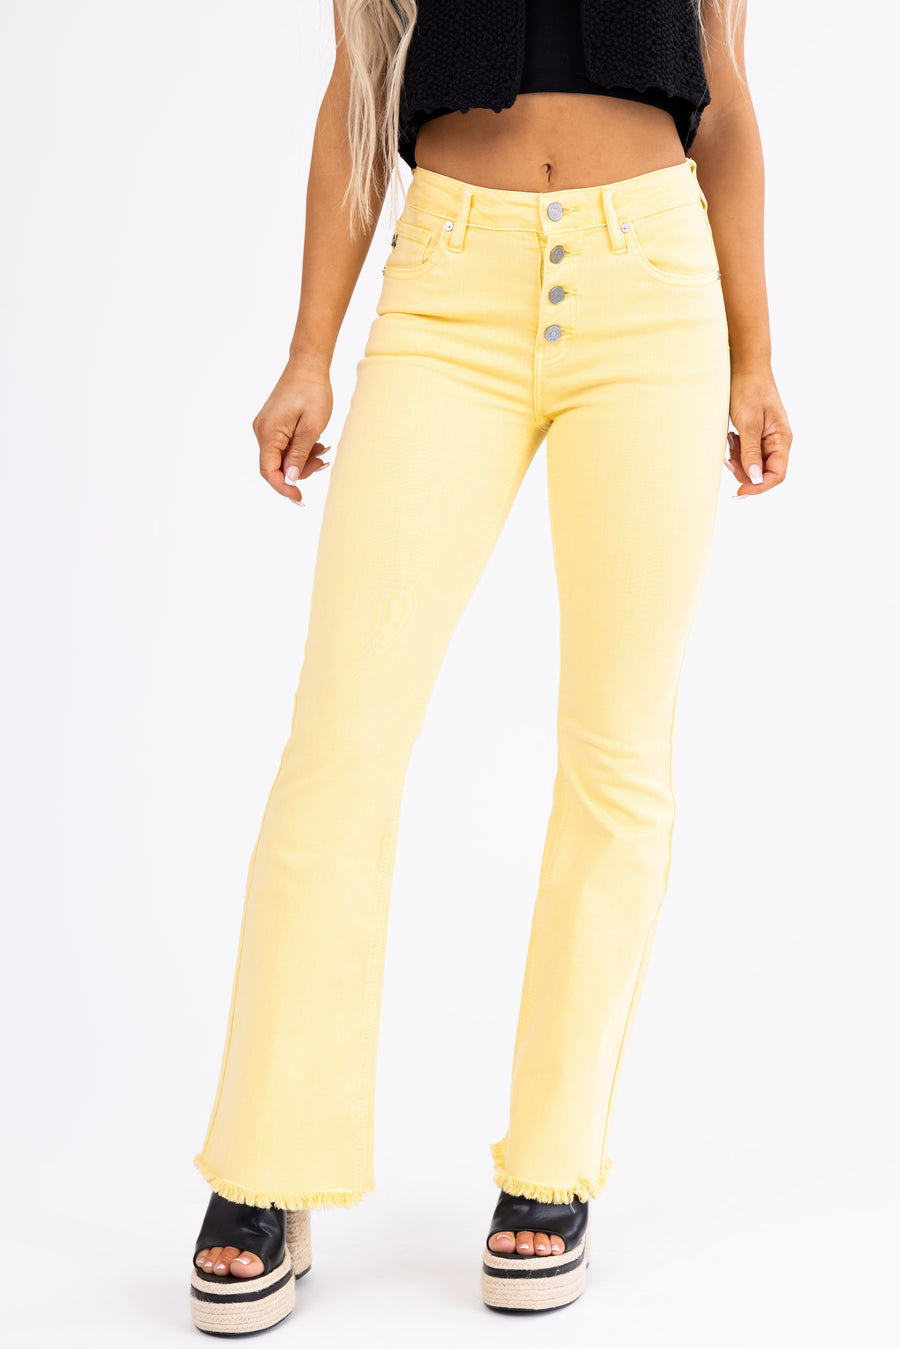 KanCan Mellow Yellow High Rise Flare Jeans